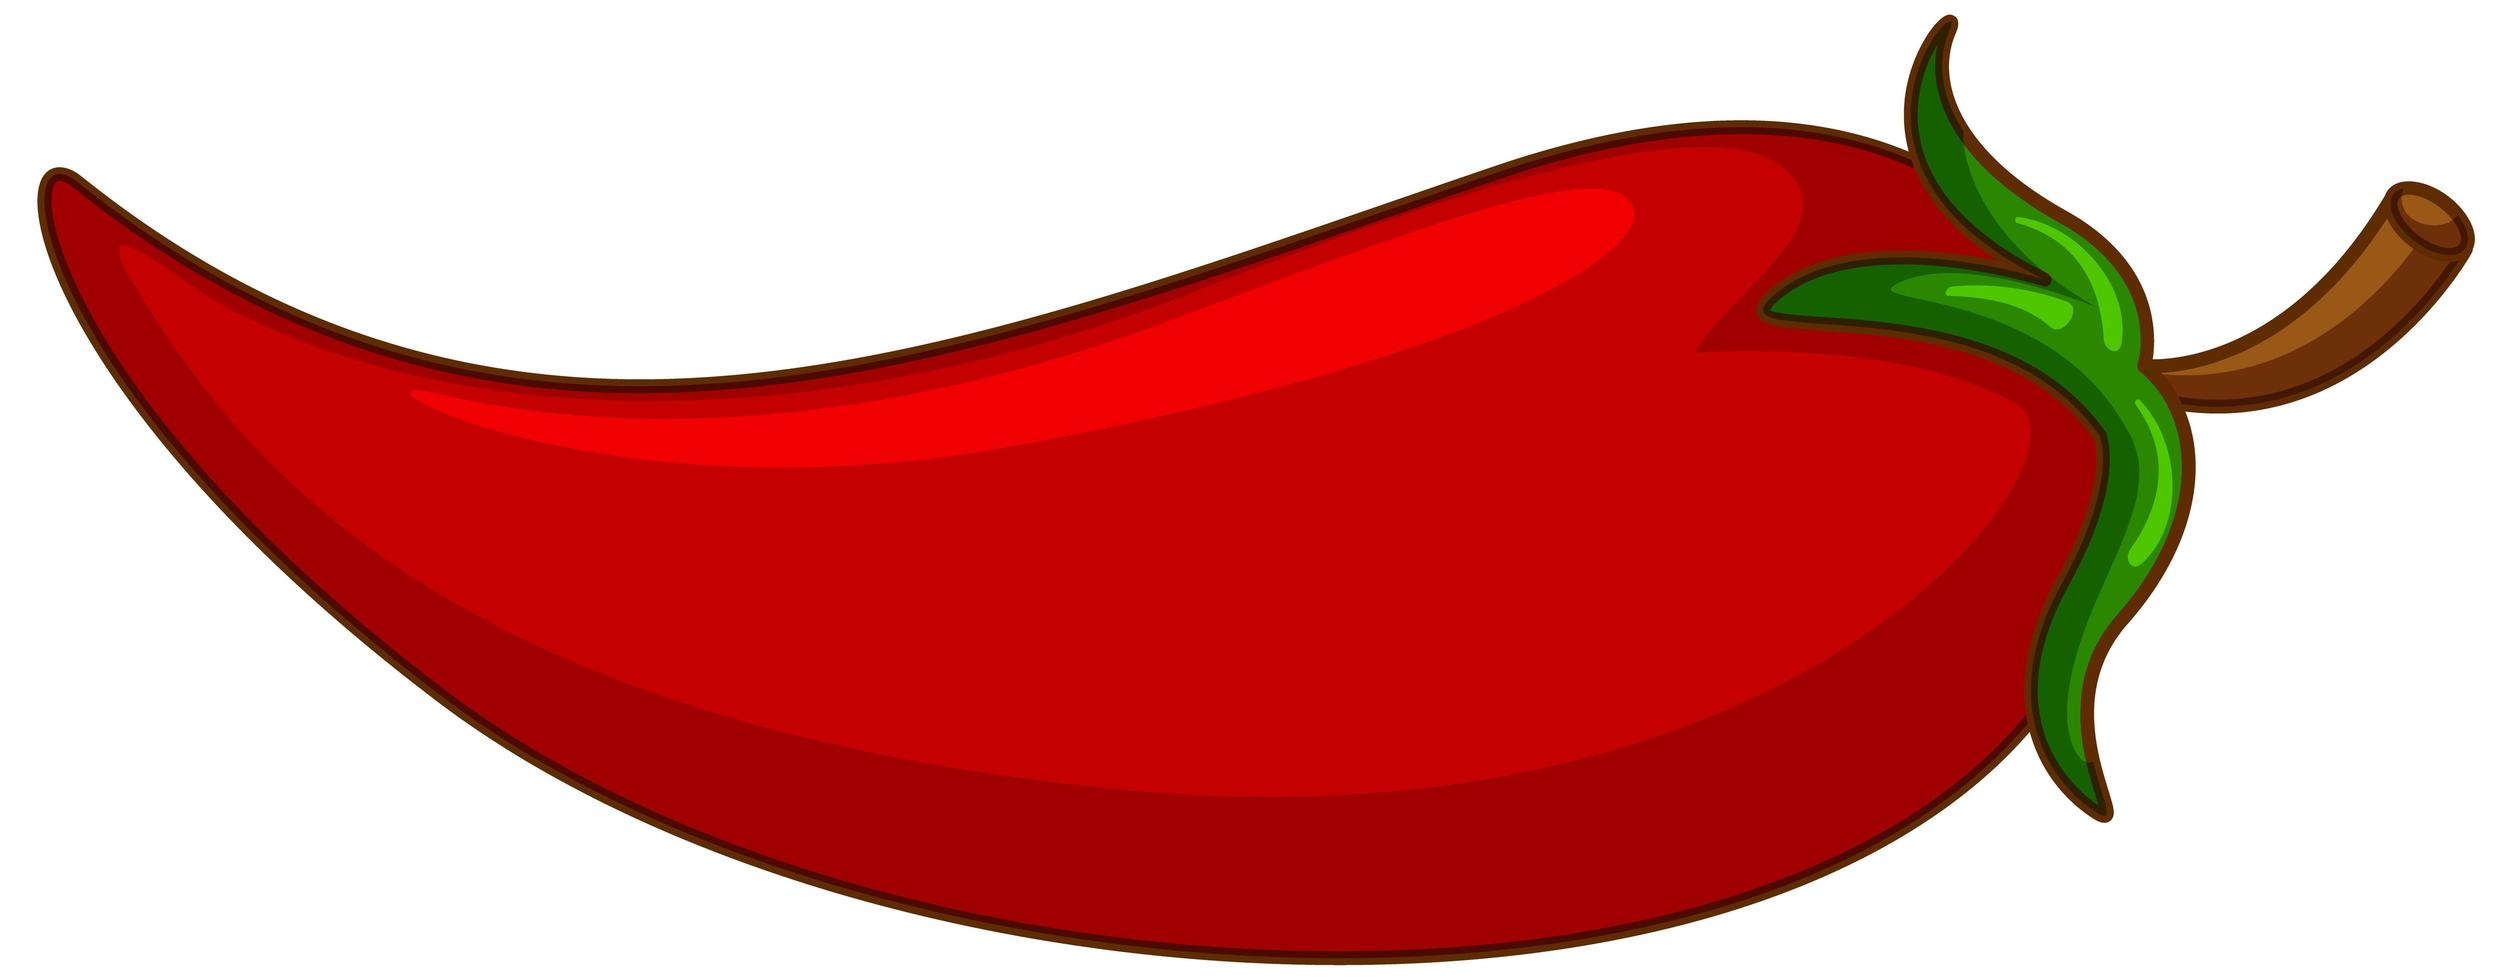 One red chili on white background vector